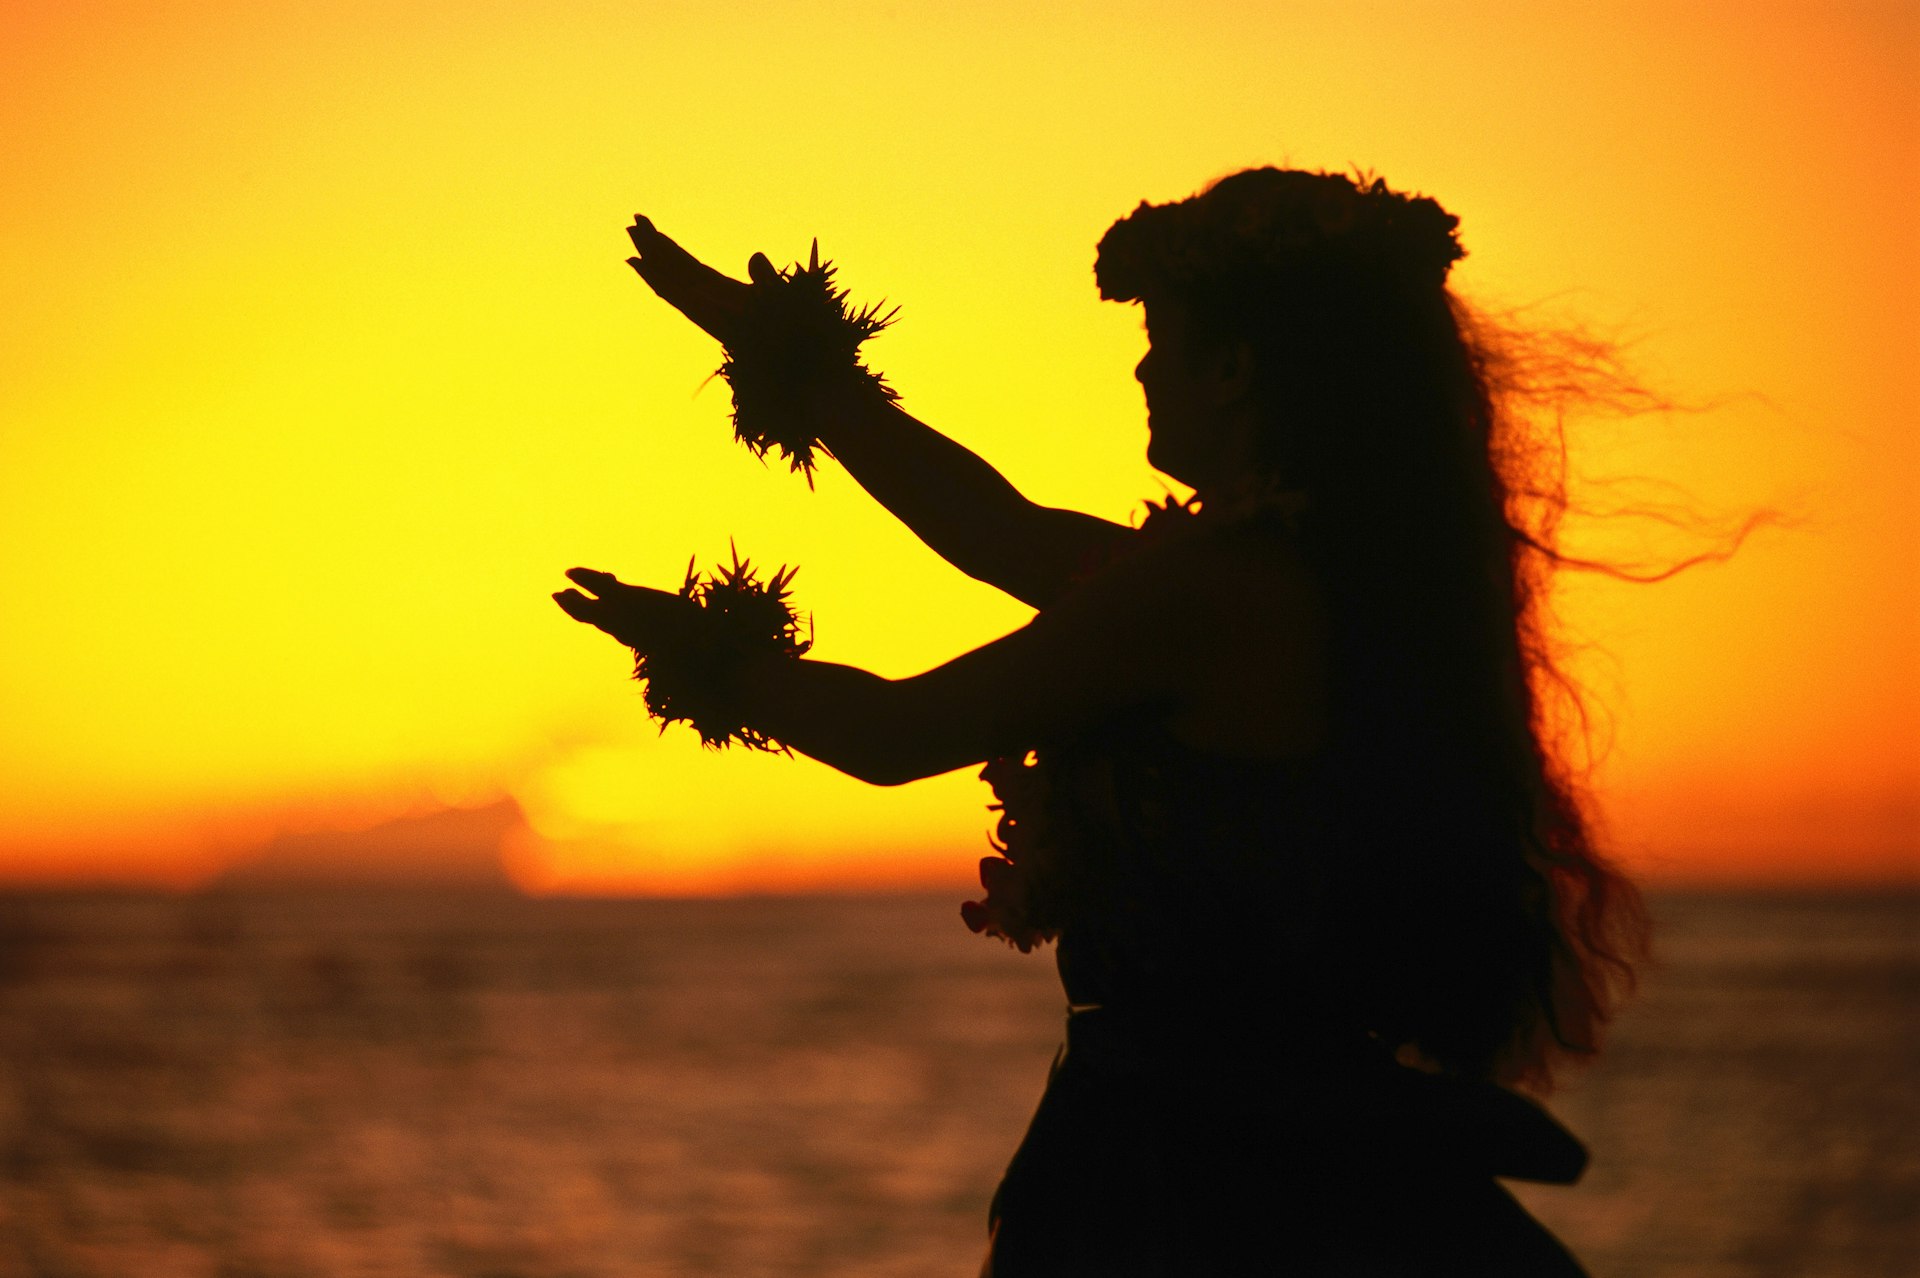 Hula dancer at sunset. Image by Ann Cecil / Lonely Planet Images / Getty